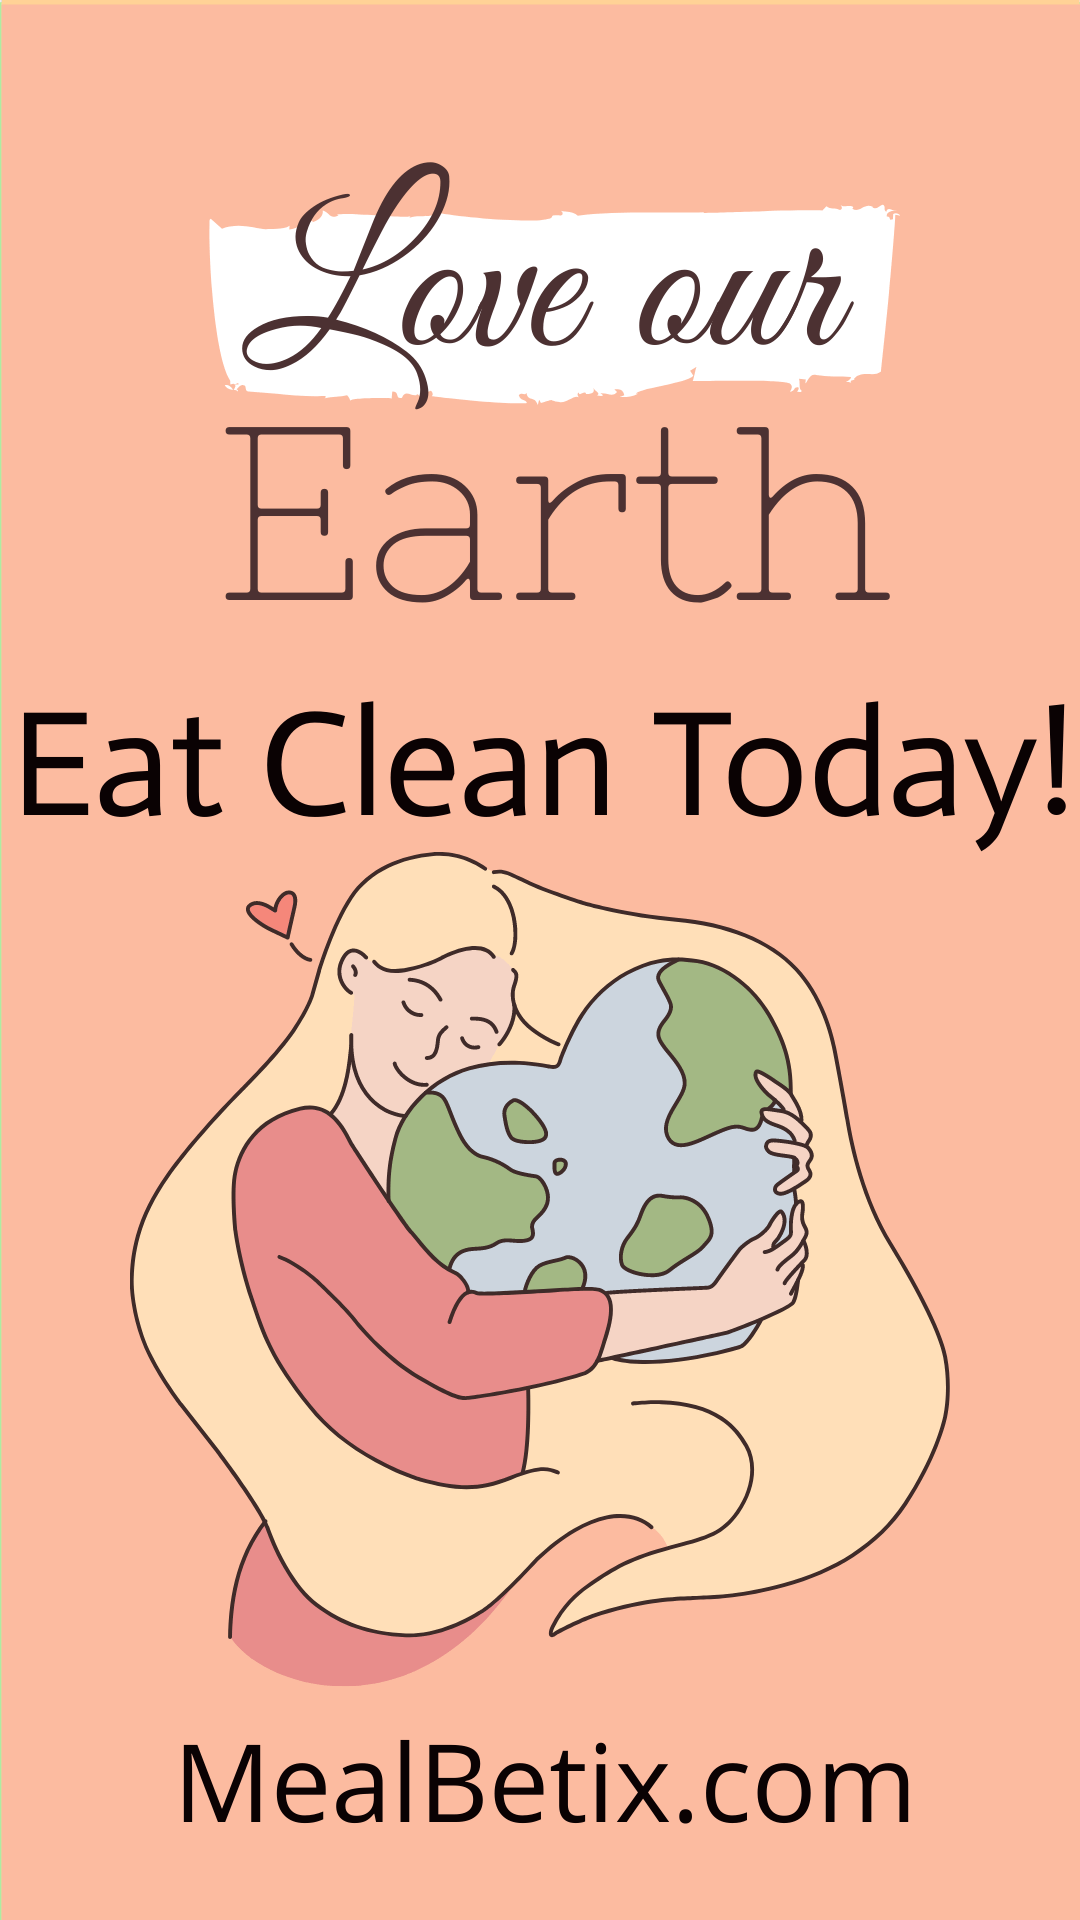 EVERY DAY SHOULD BE EARTH DAY